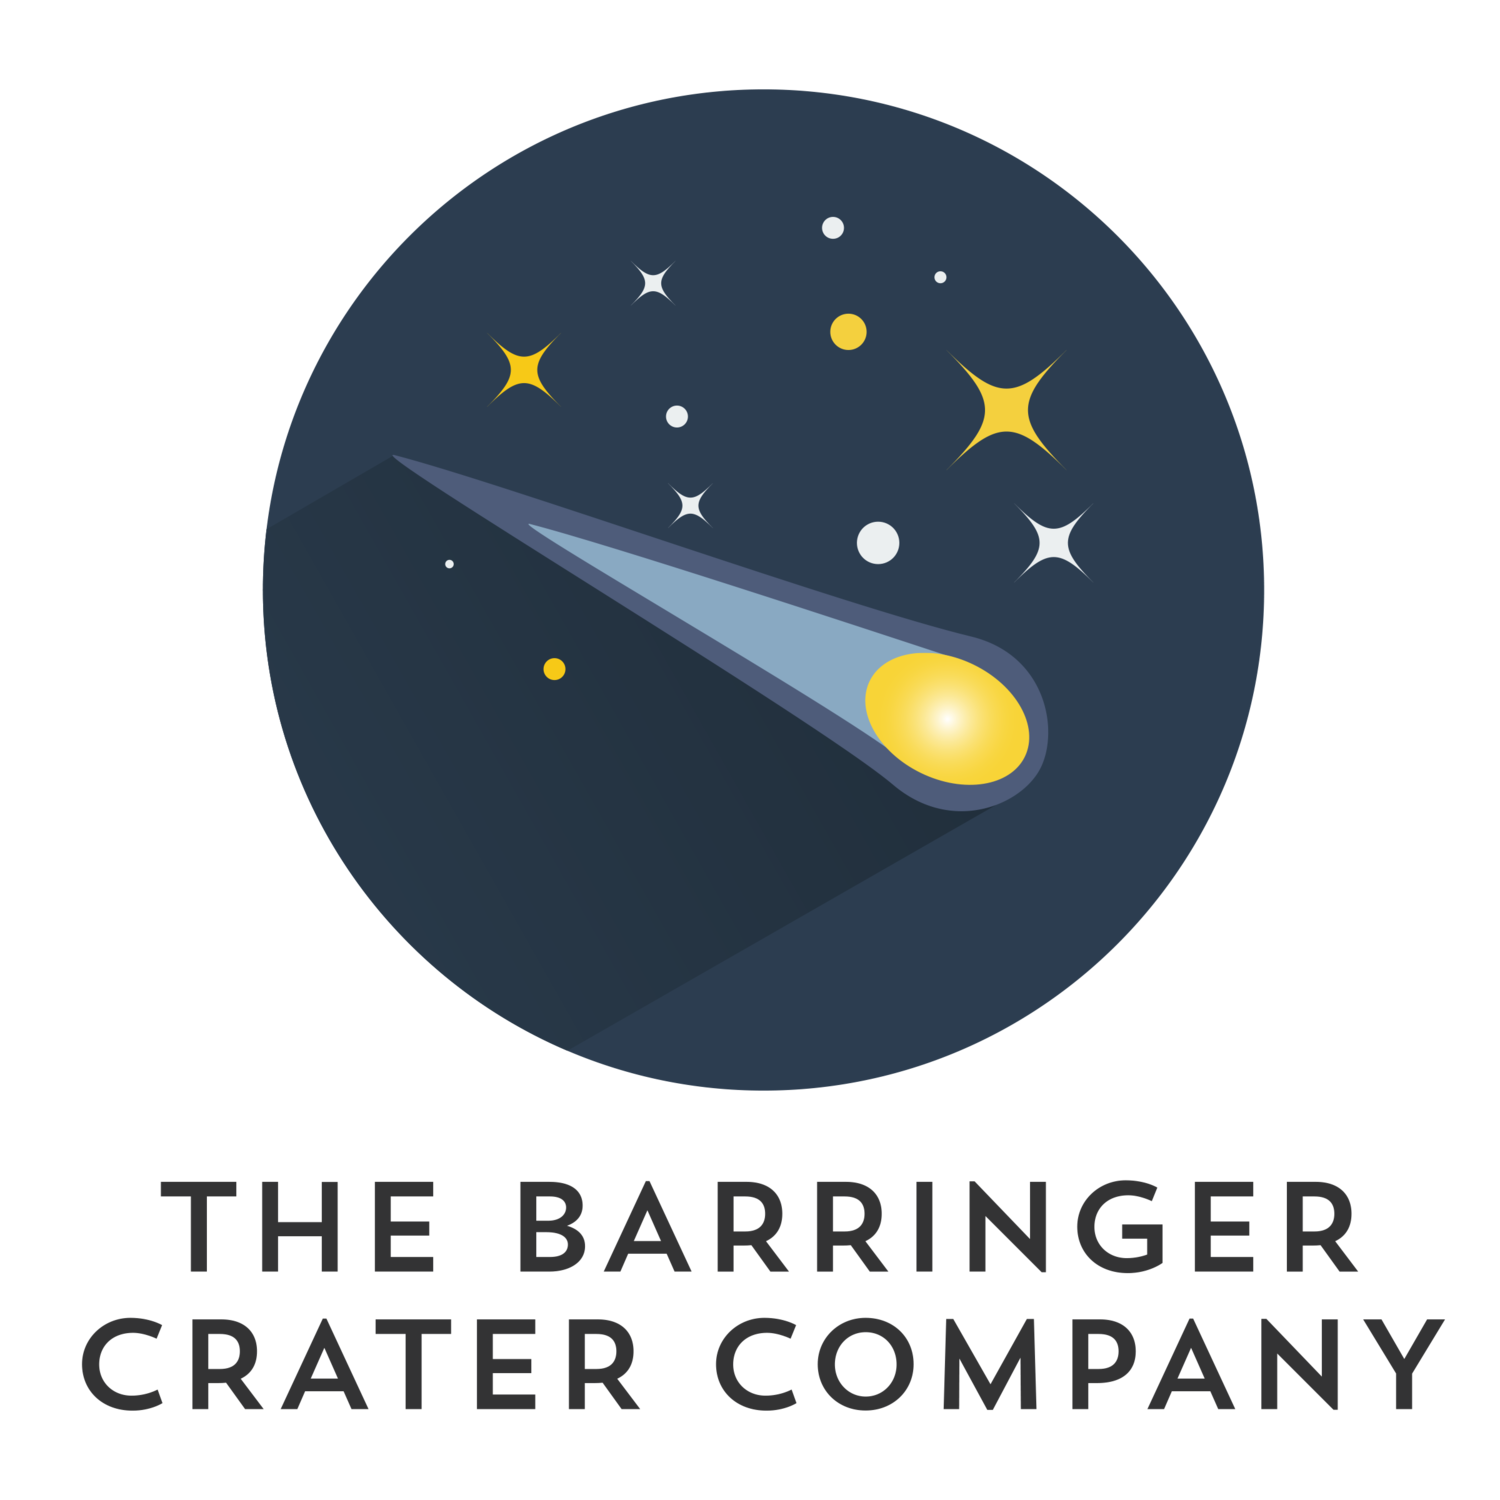 The Barringer Crater Company